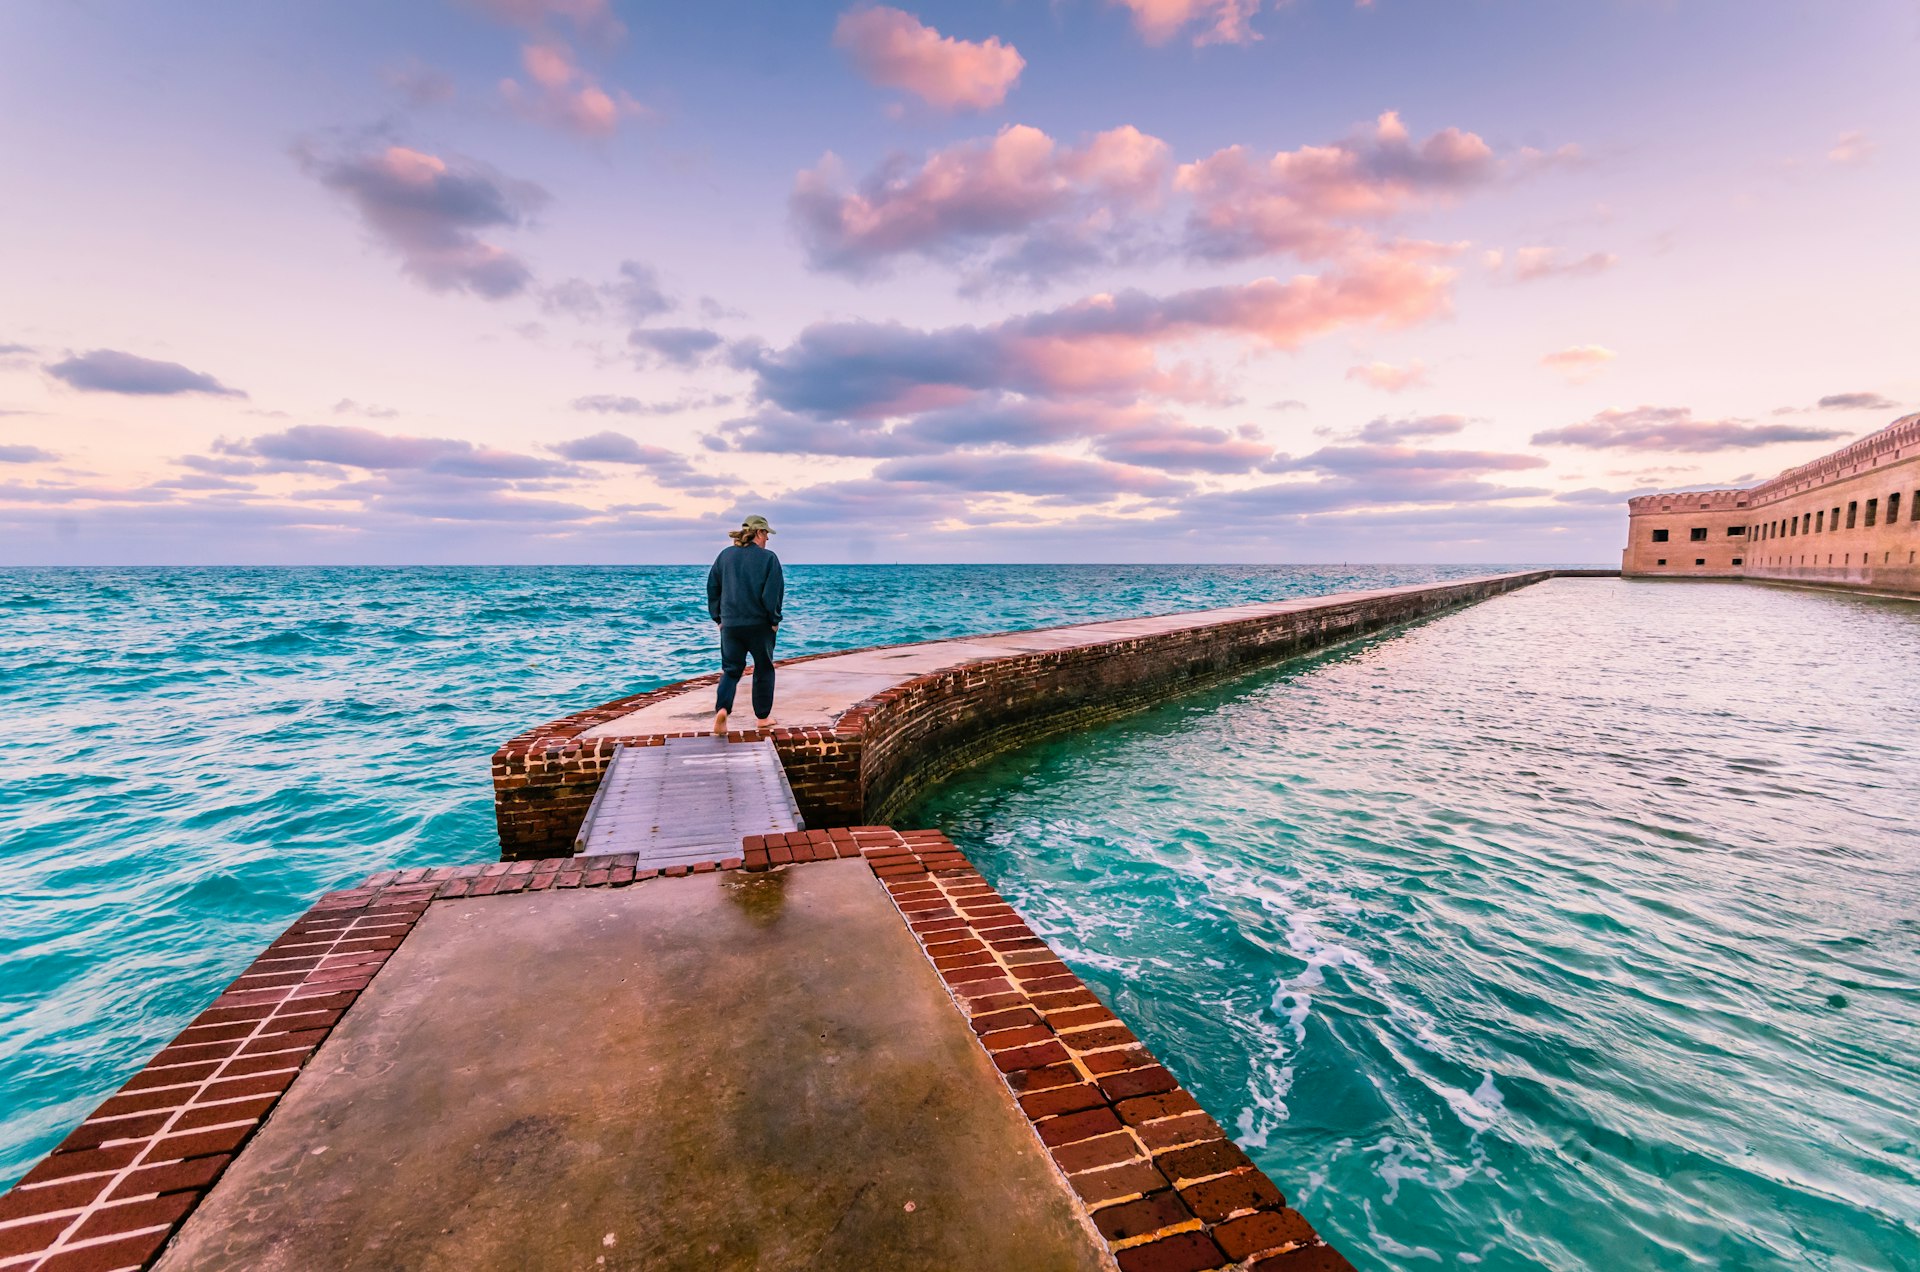 Man takes a morning walk on the moat around Port Jefferson at Dry Tortugas National Park, Florida Keys, Florida, USA